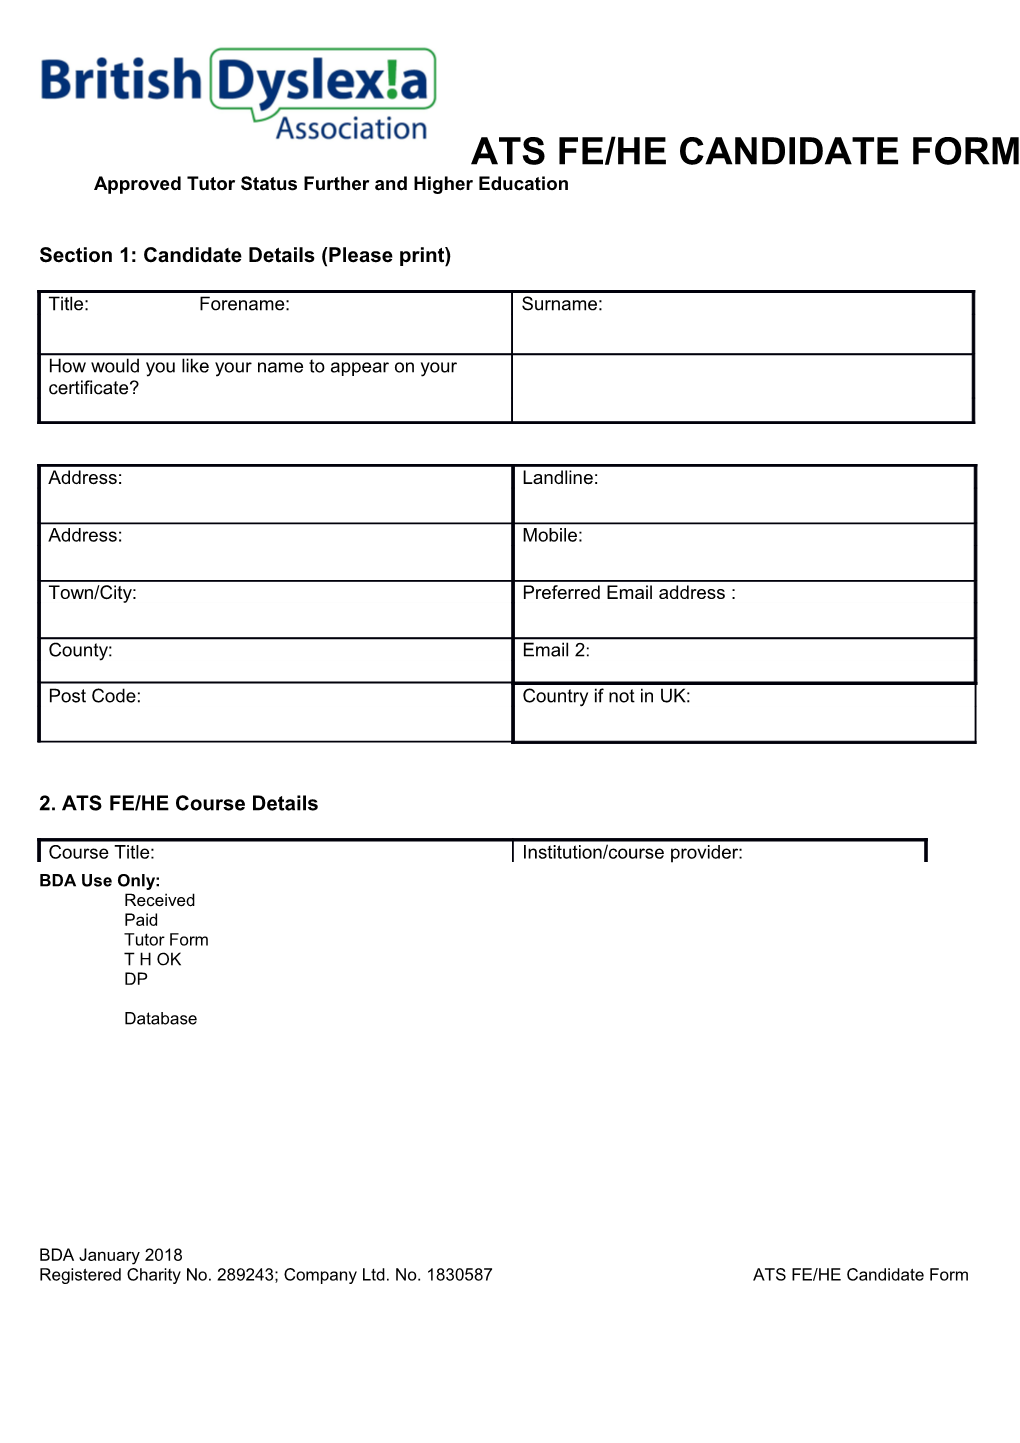 Section 1: Candidate Details (Please Print)